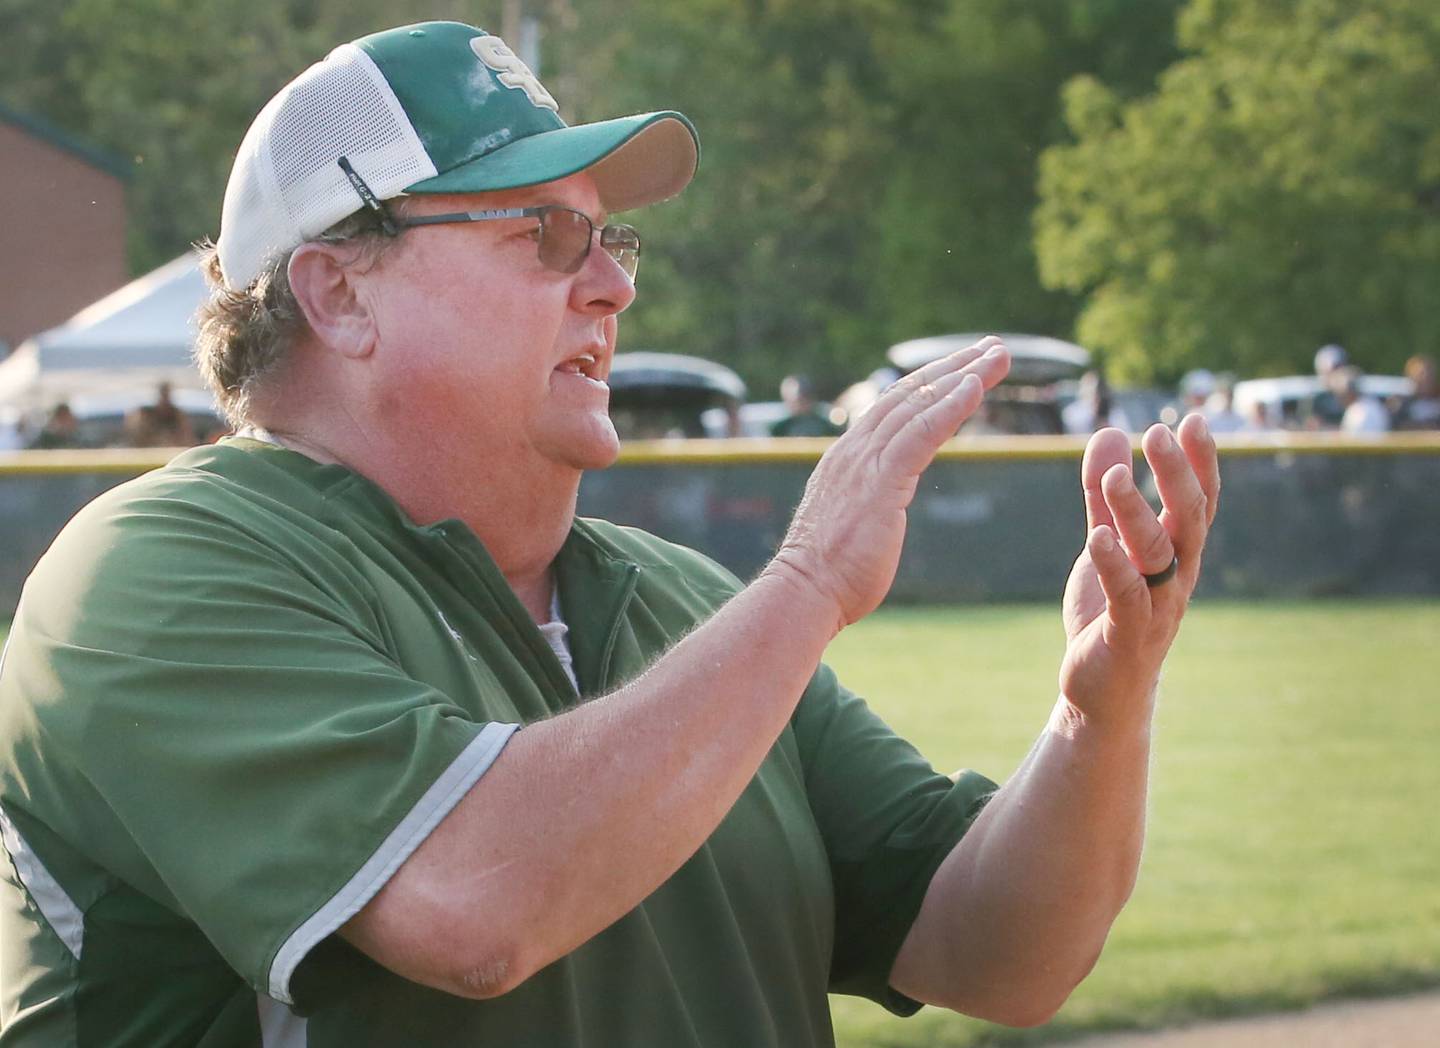 St. Bede head coach Shawn Sons cheers on his team in the Class 1A Sectional semifinal game on Tuesday, May 23, 20223 at St. Bede Academy.